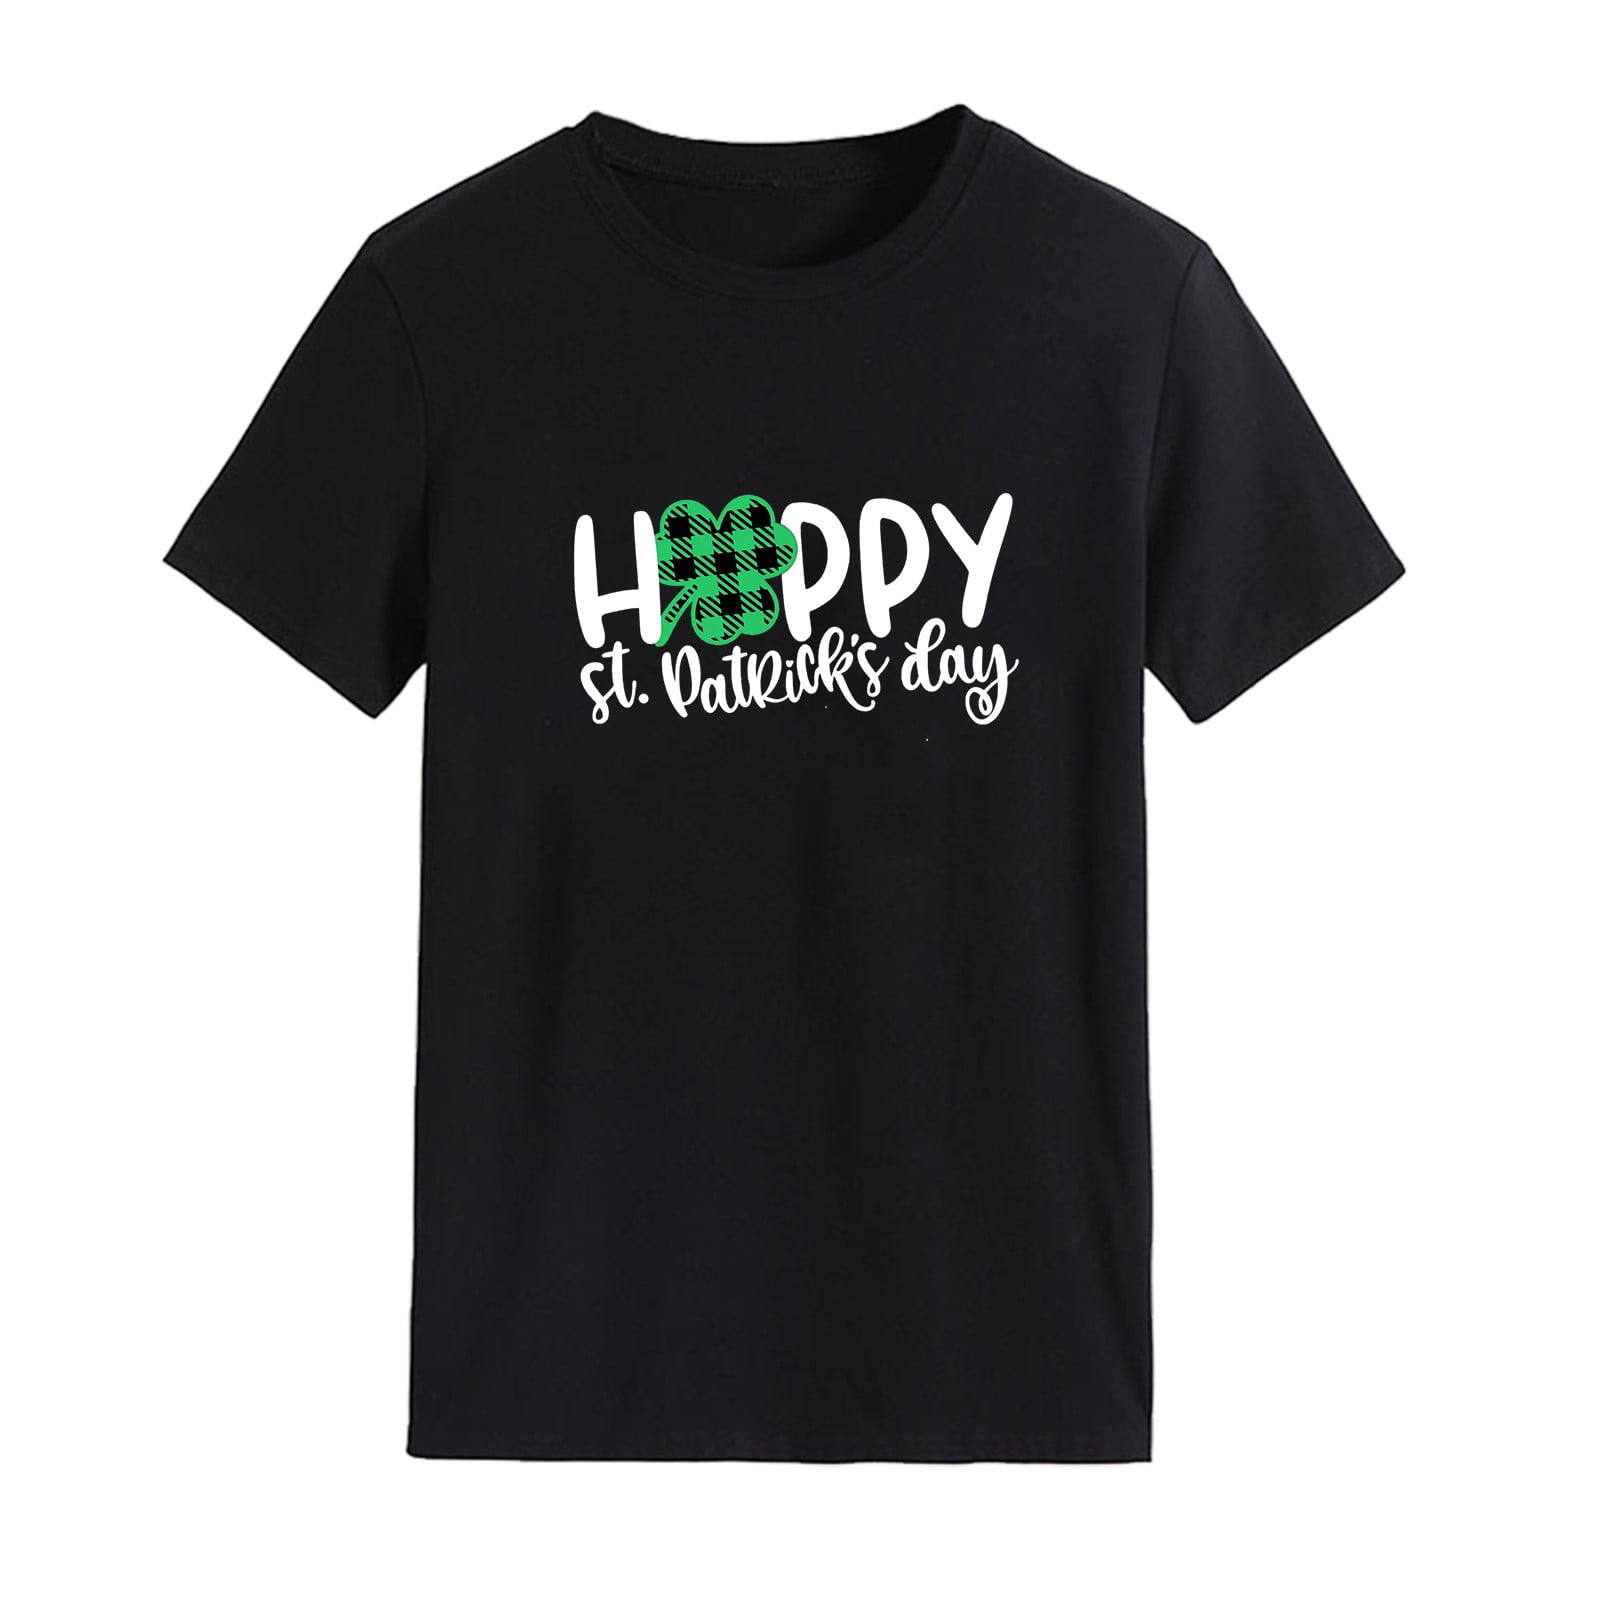 HGWXX7 New St. Patrick's Day Women's Casual Short Sleeve Crewneck Letter  Printed T Shirt Tops Loose Tee Black XXL